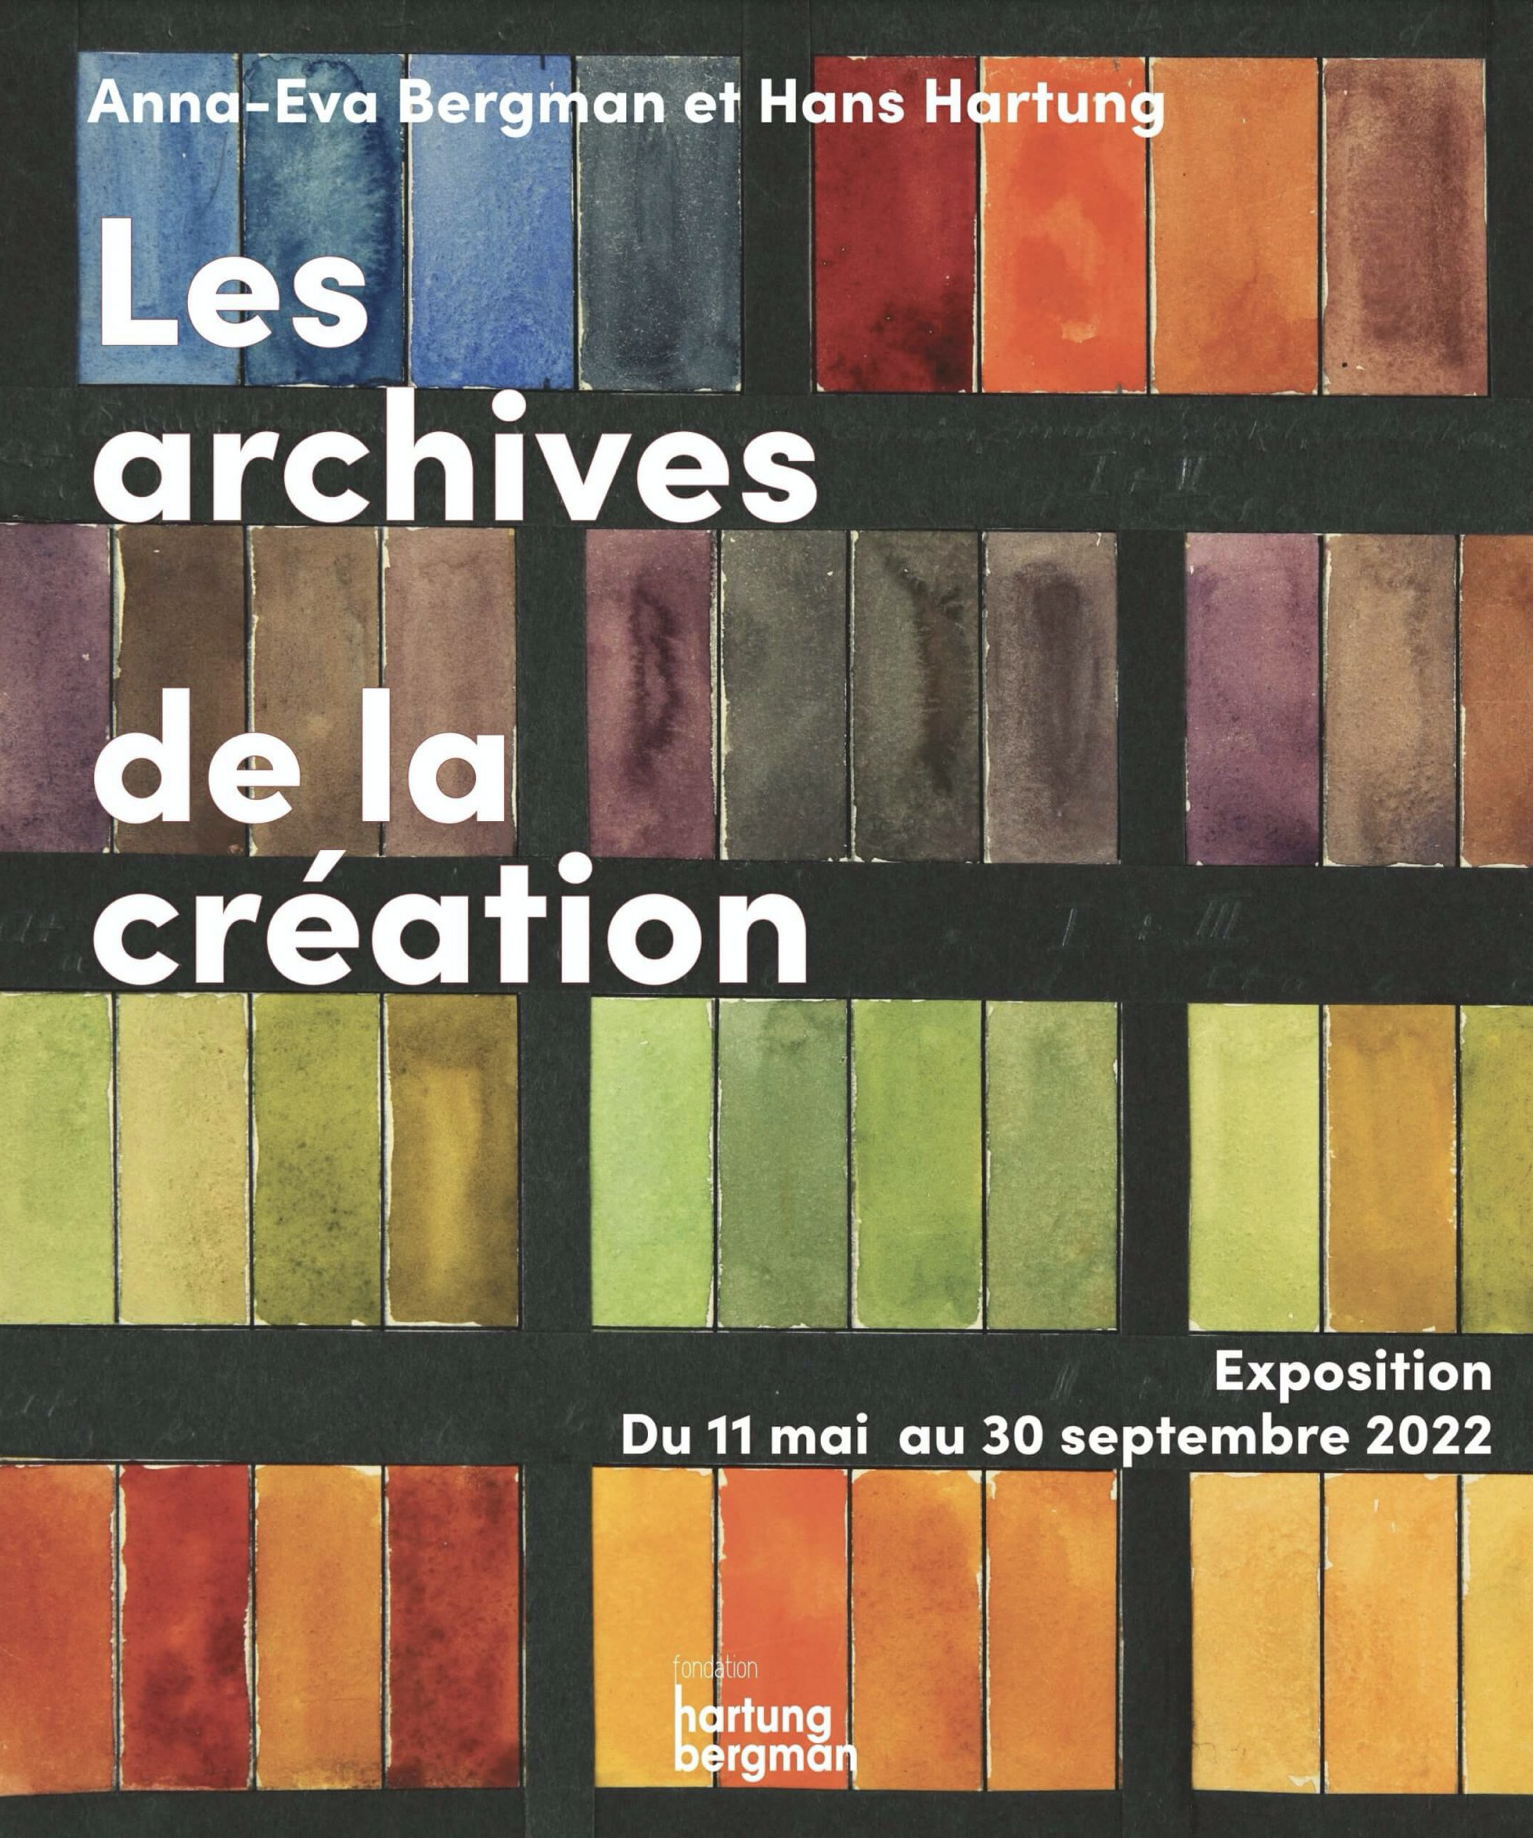 The archives of creation